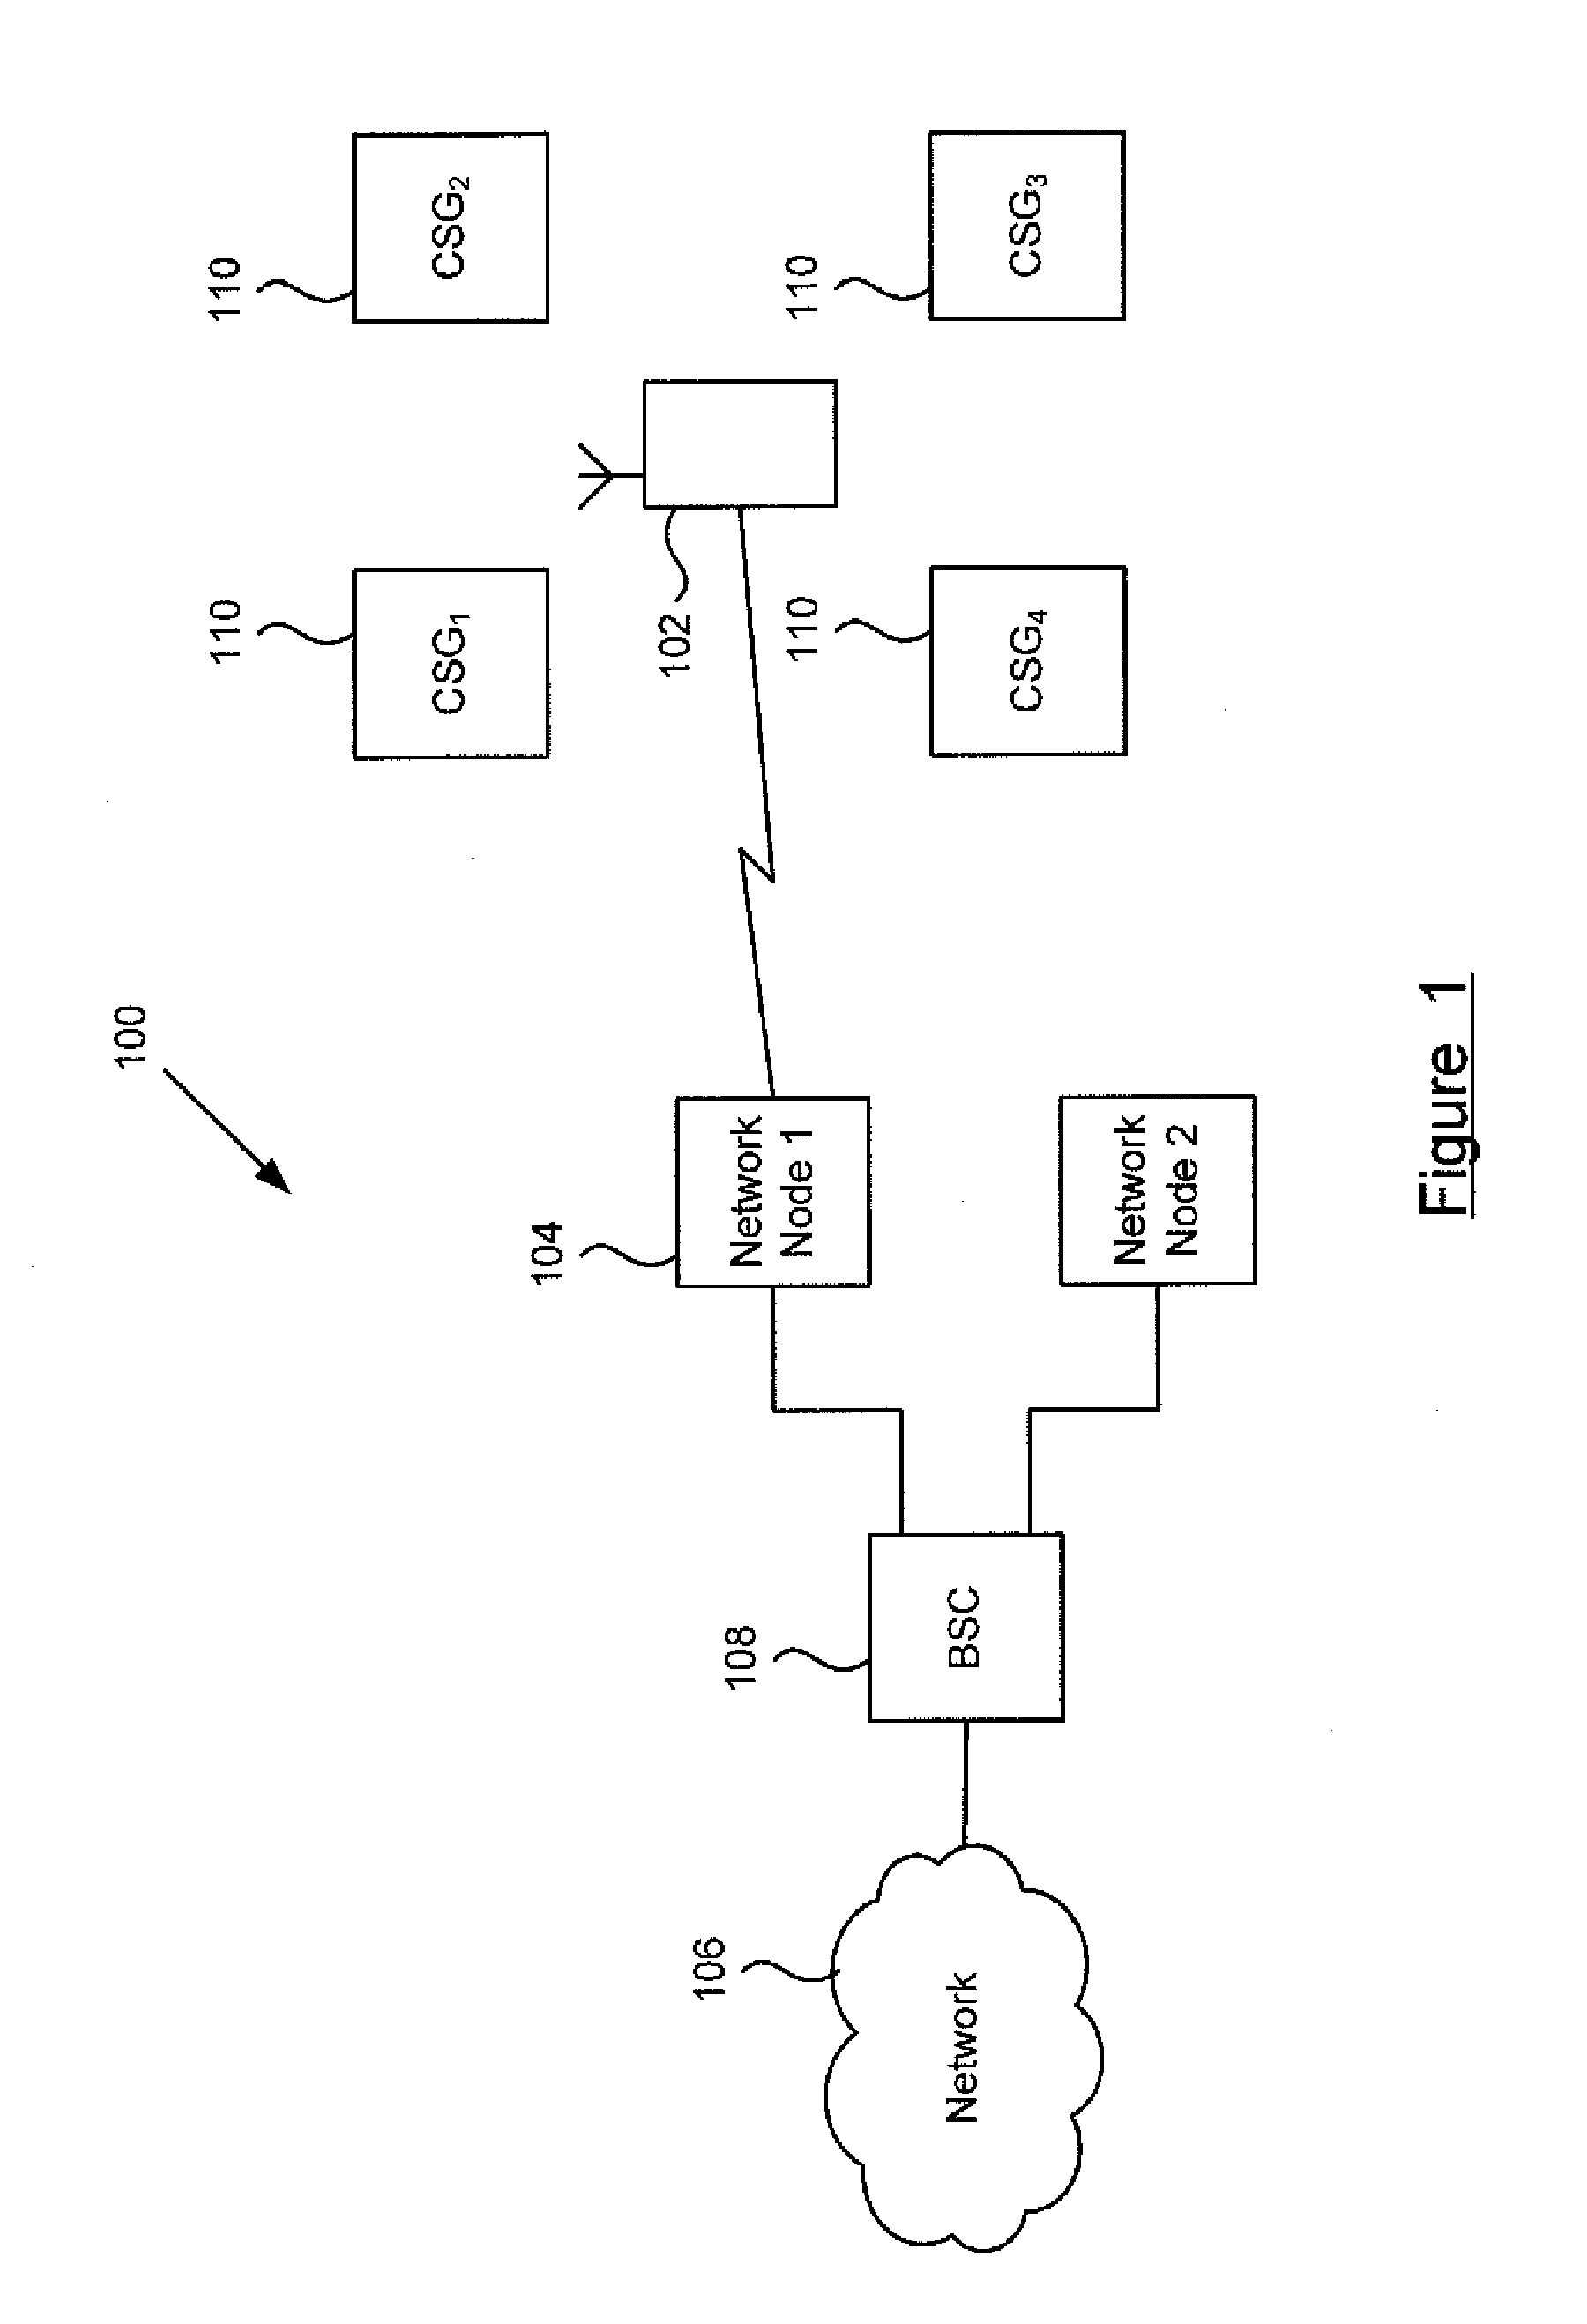 Method and apparatus for identifying closed subscriber group cells